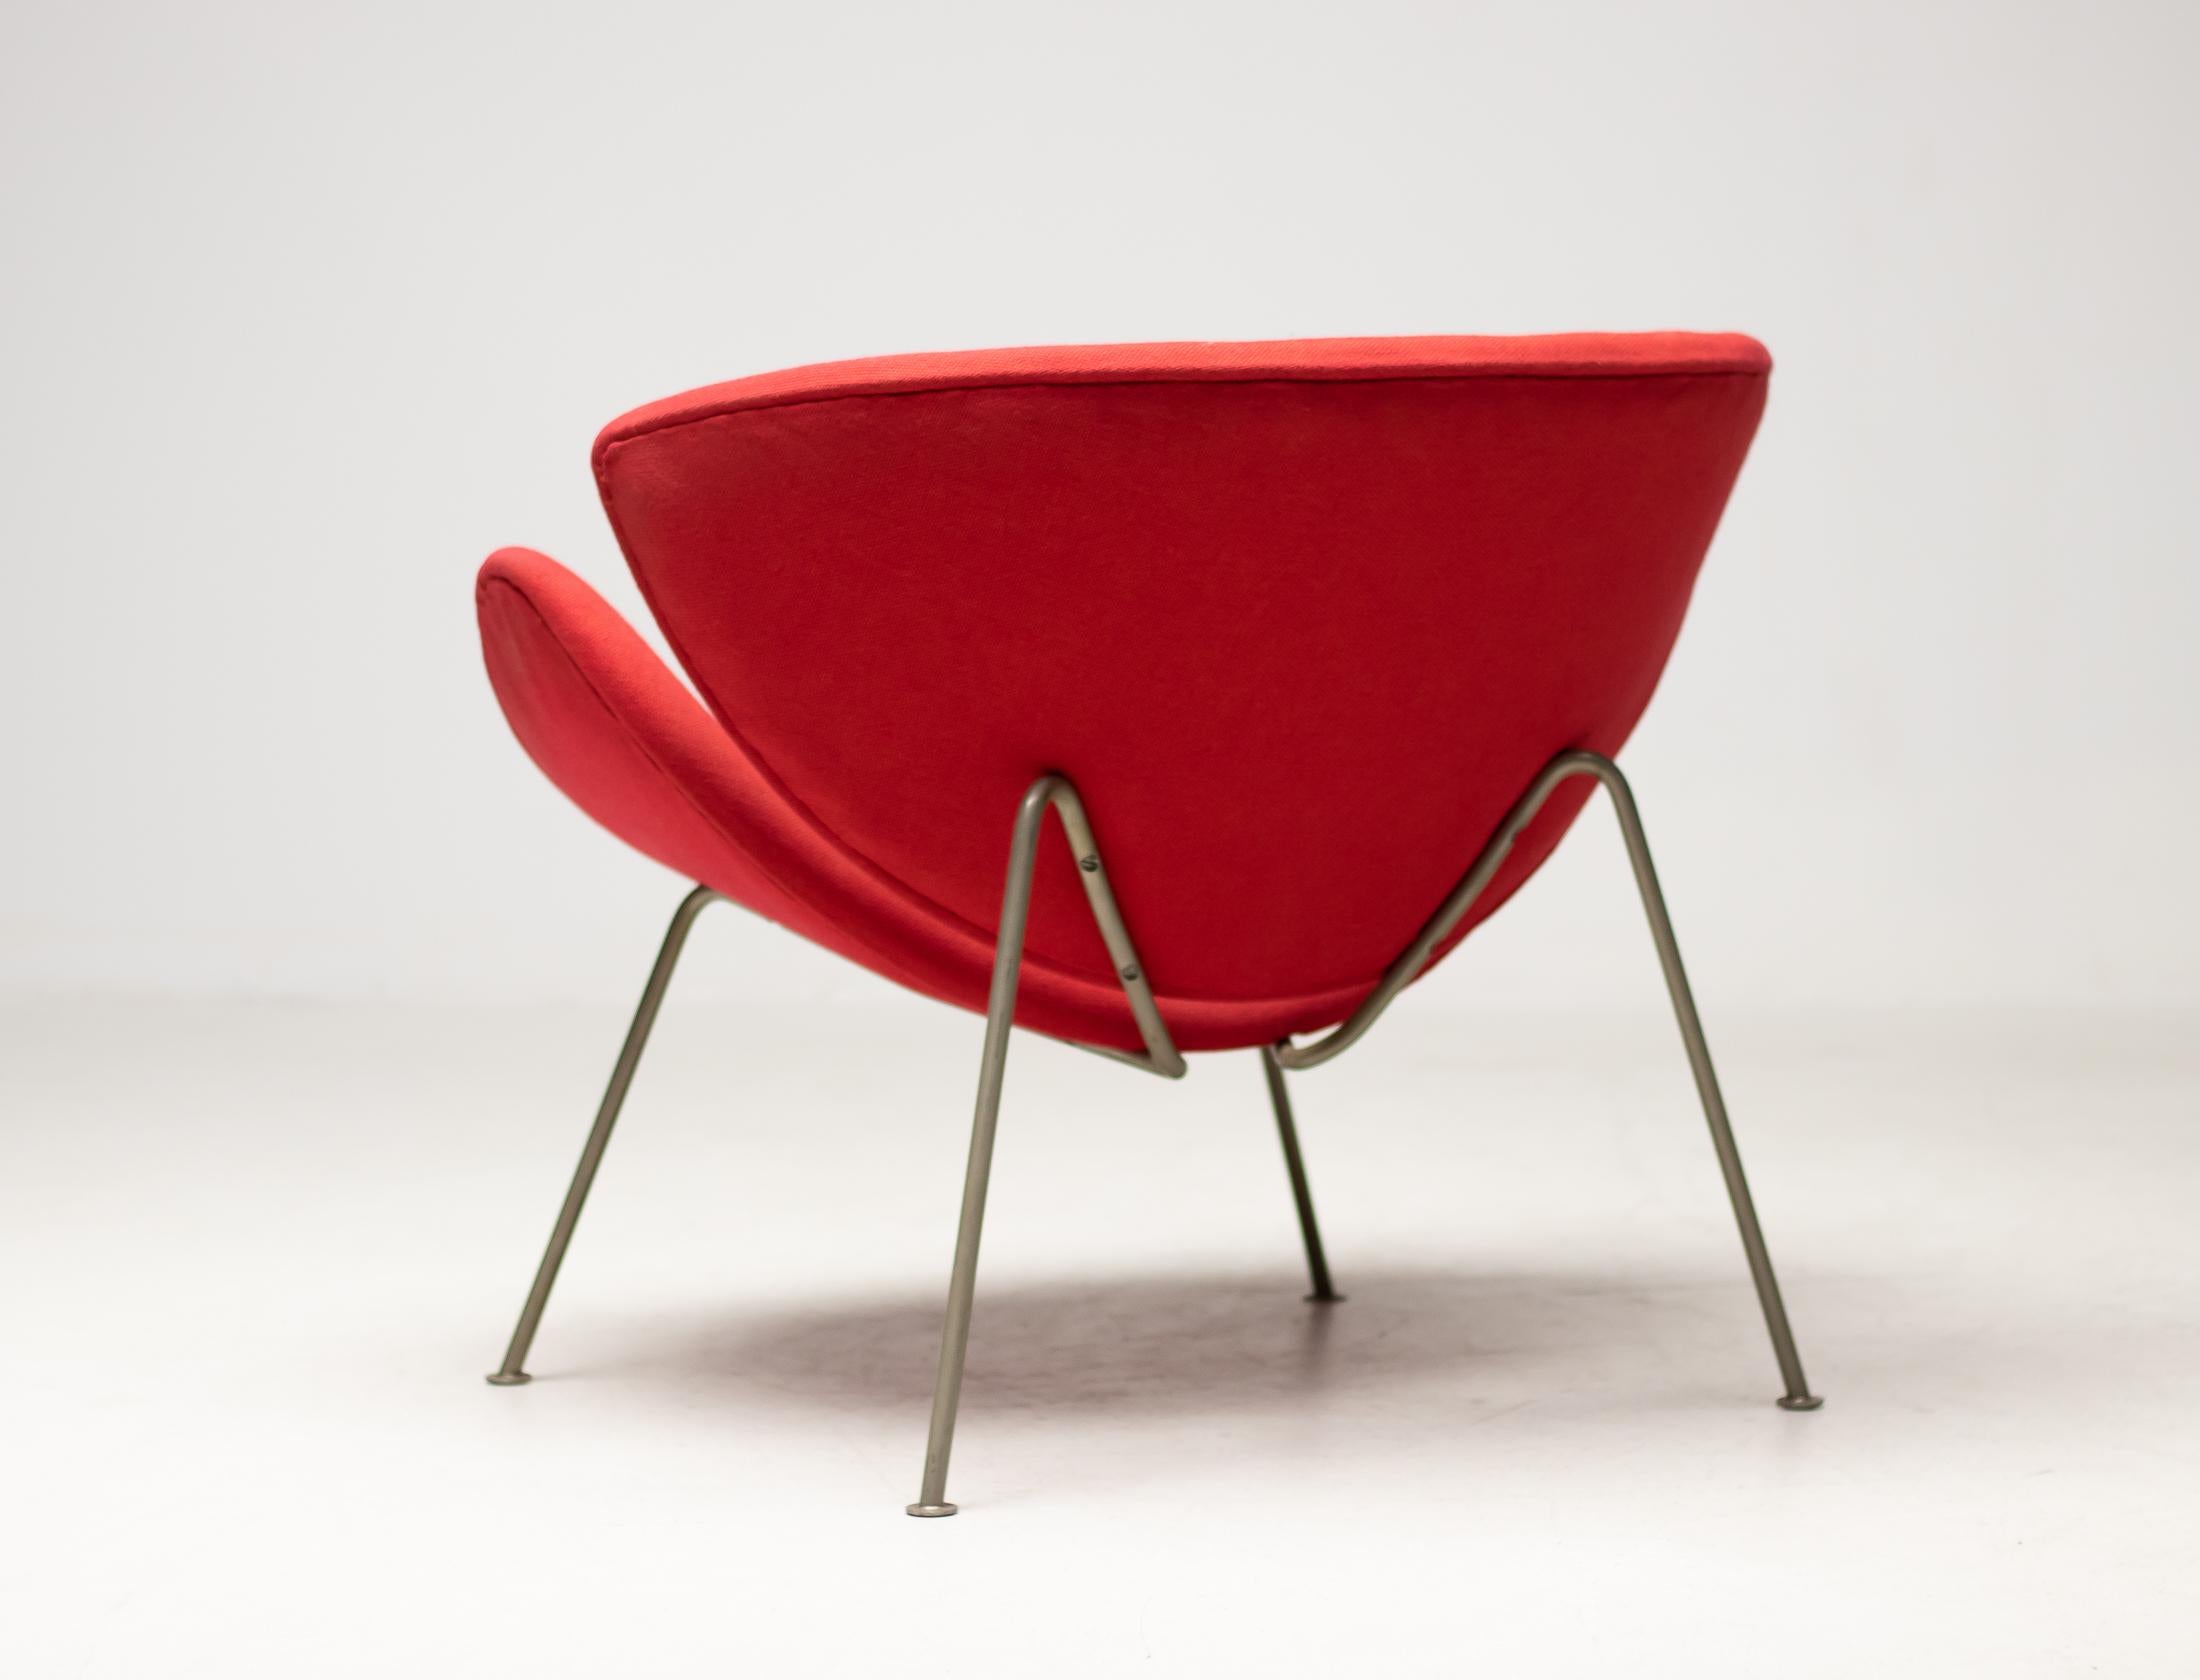 Very early example of this great design Classic by Pierre Paulin for Artifort.
Elegant zinc-plated steel frame instead of the later chrome-plated frame.
Refined slim seat and back shells made of upholstered plywood.